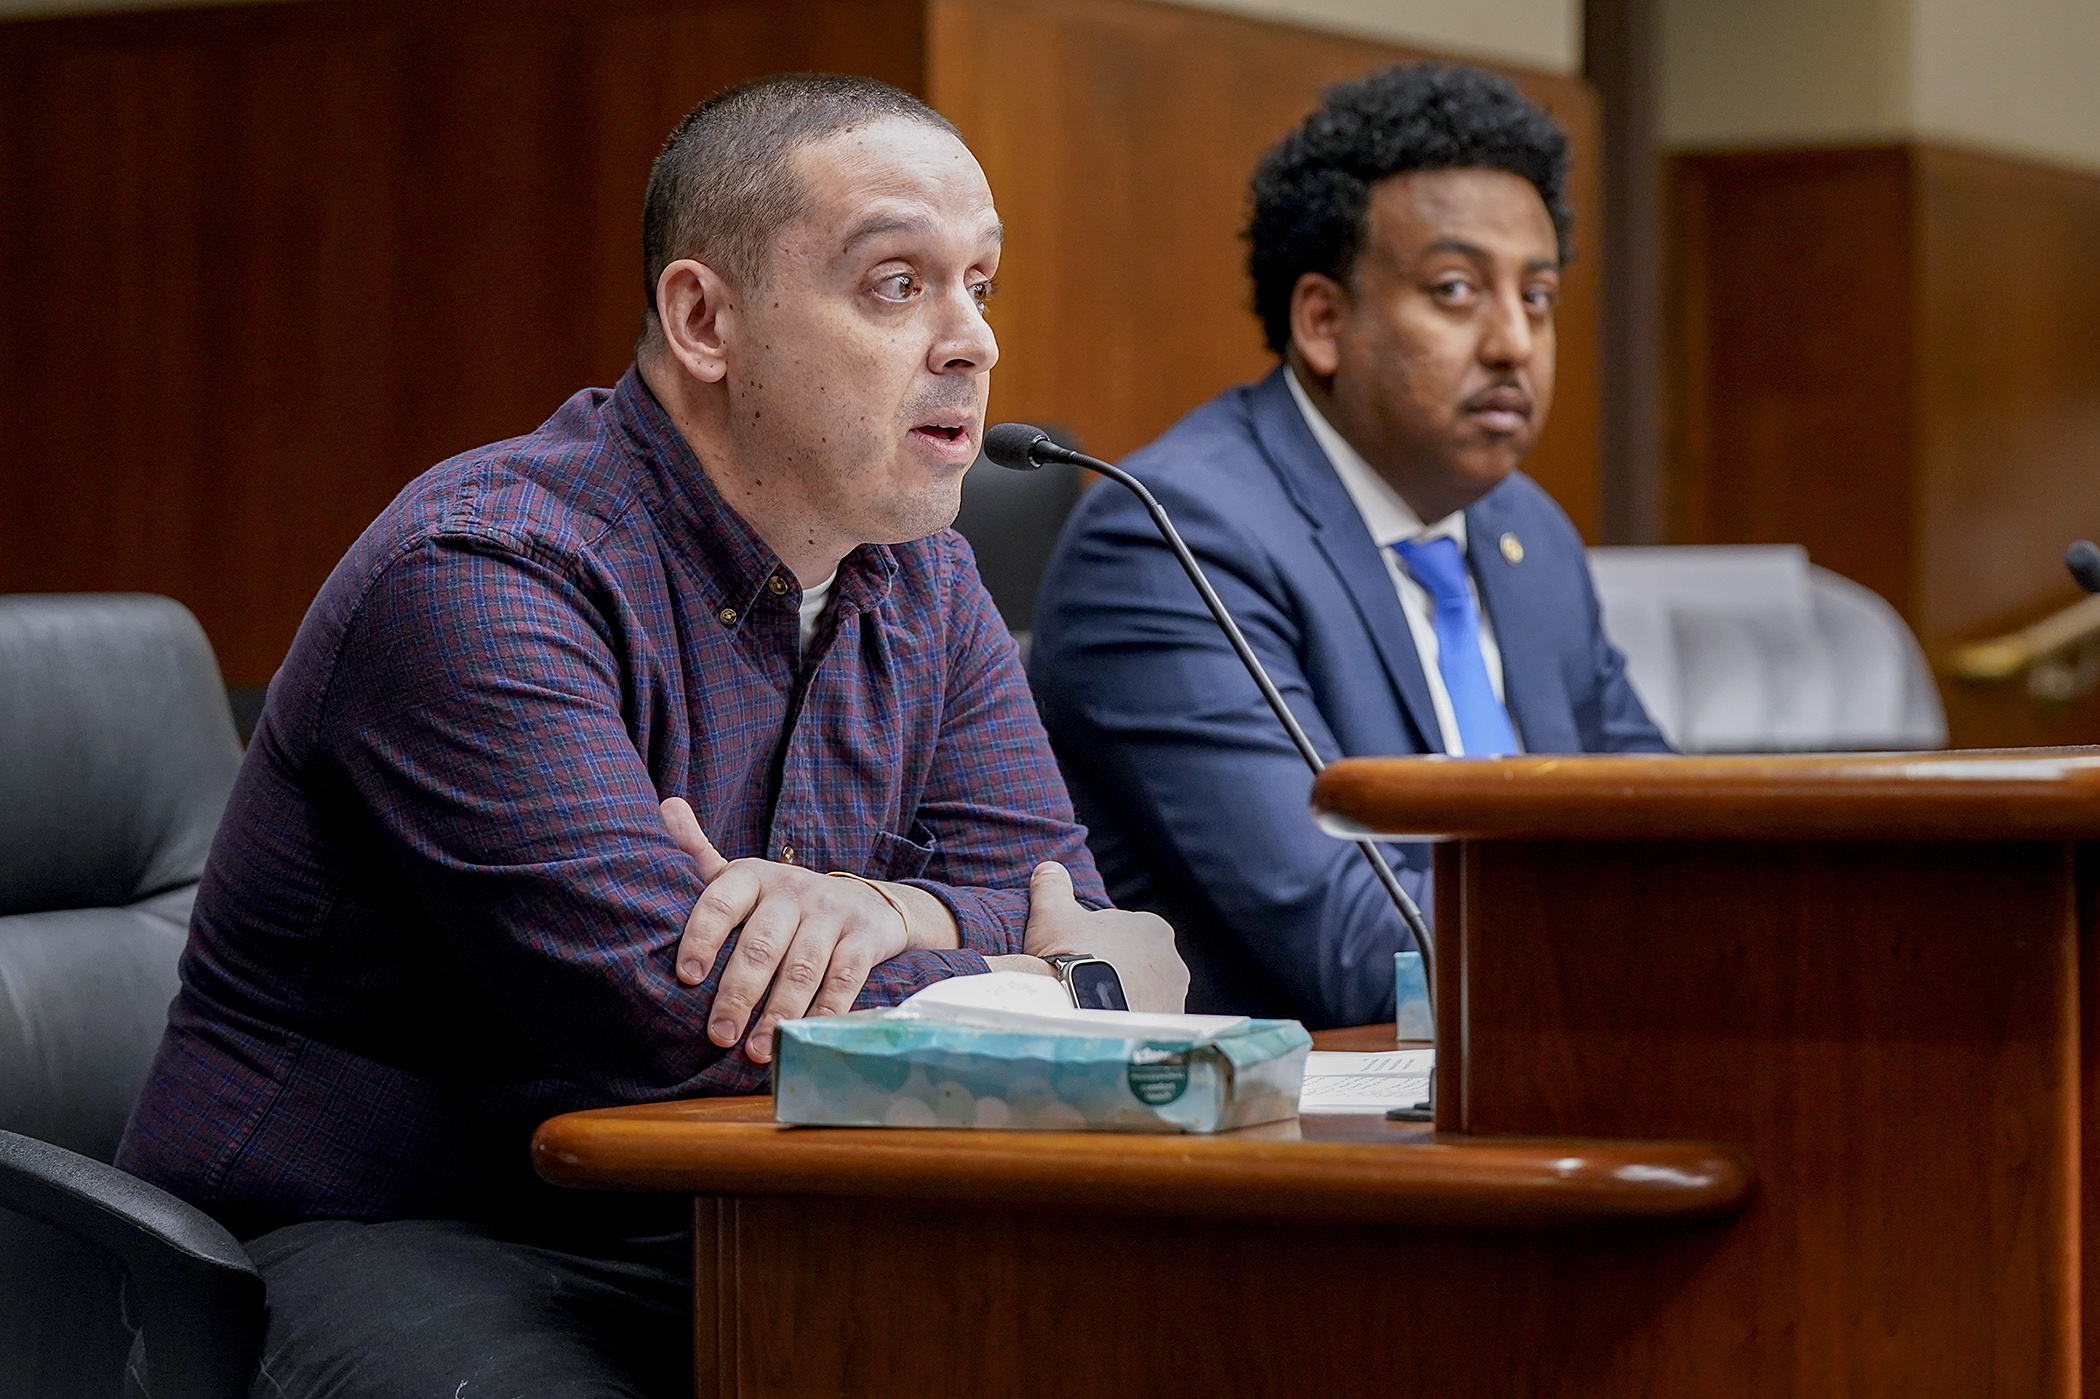 St. Paul Parks and Recreation Director Andy Rodriguez testifies Tuesday in support of a bill to allow local governments to prohibit or restrict the possession of dangerous weapons, ammunition or explosives within their properties. (Photo by Michele Jokinen)